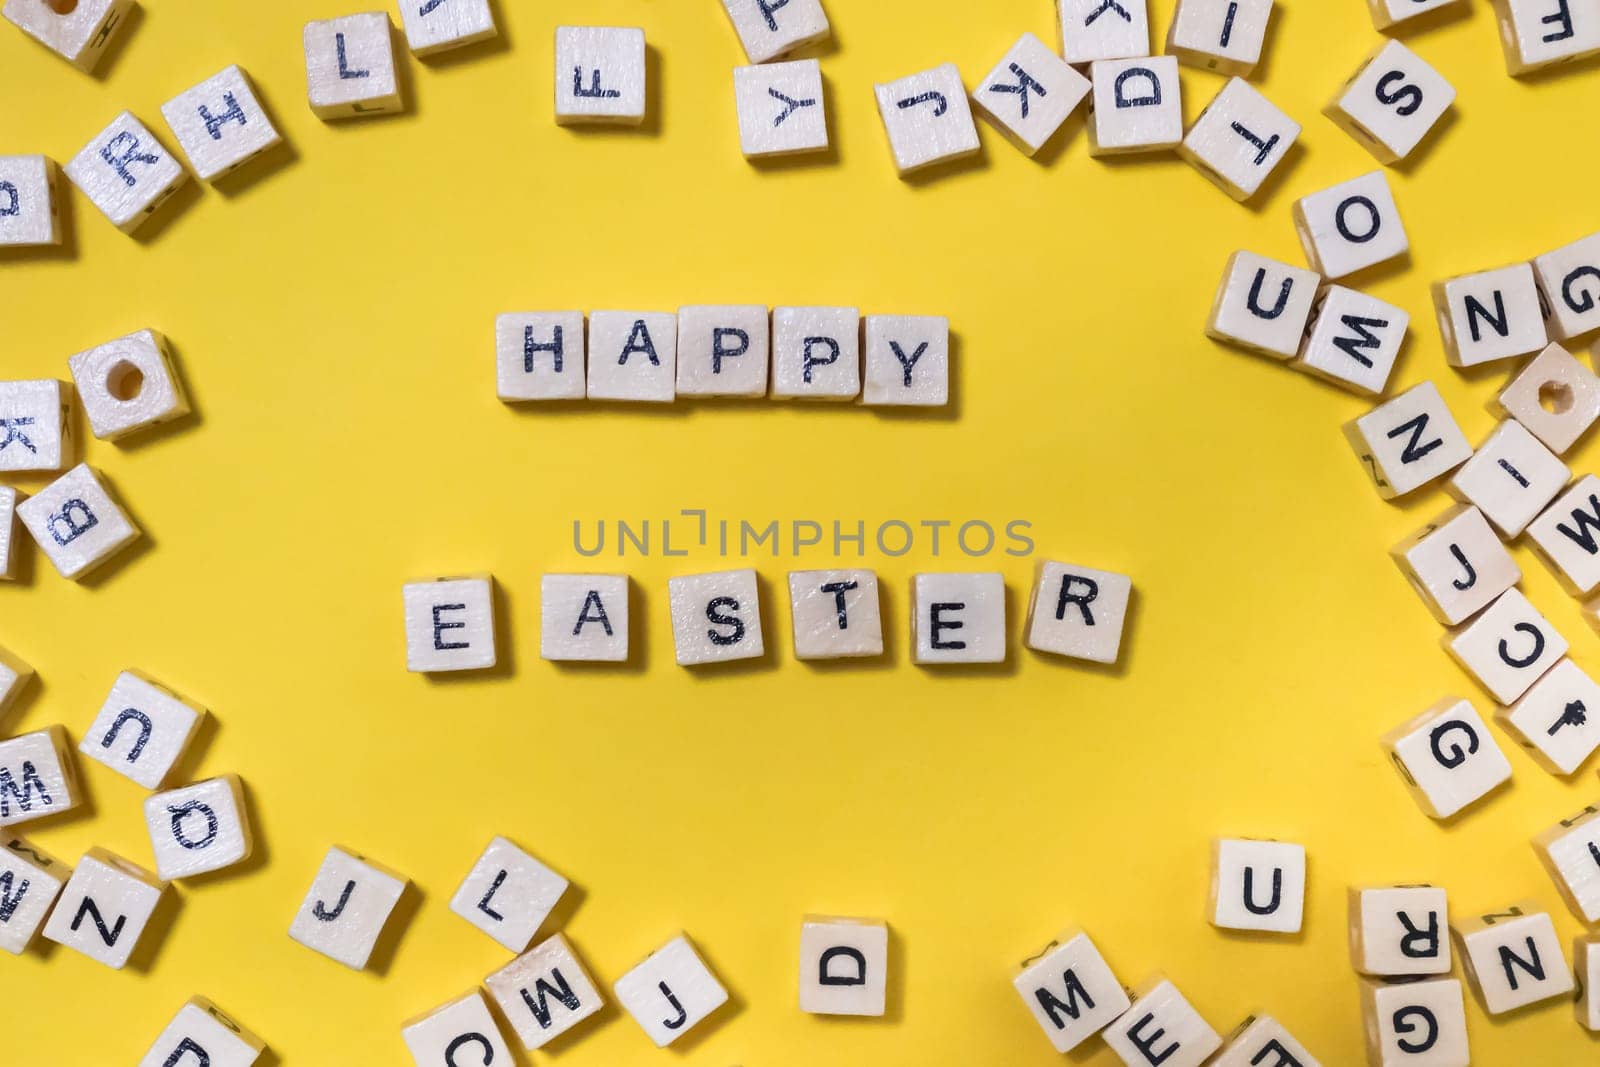  inscription on wooden cubes happy easter on yellow background by Alla_Morozova93